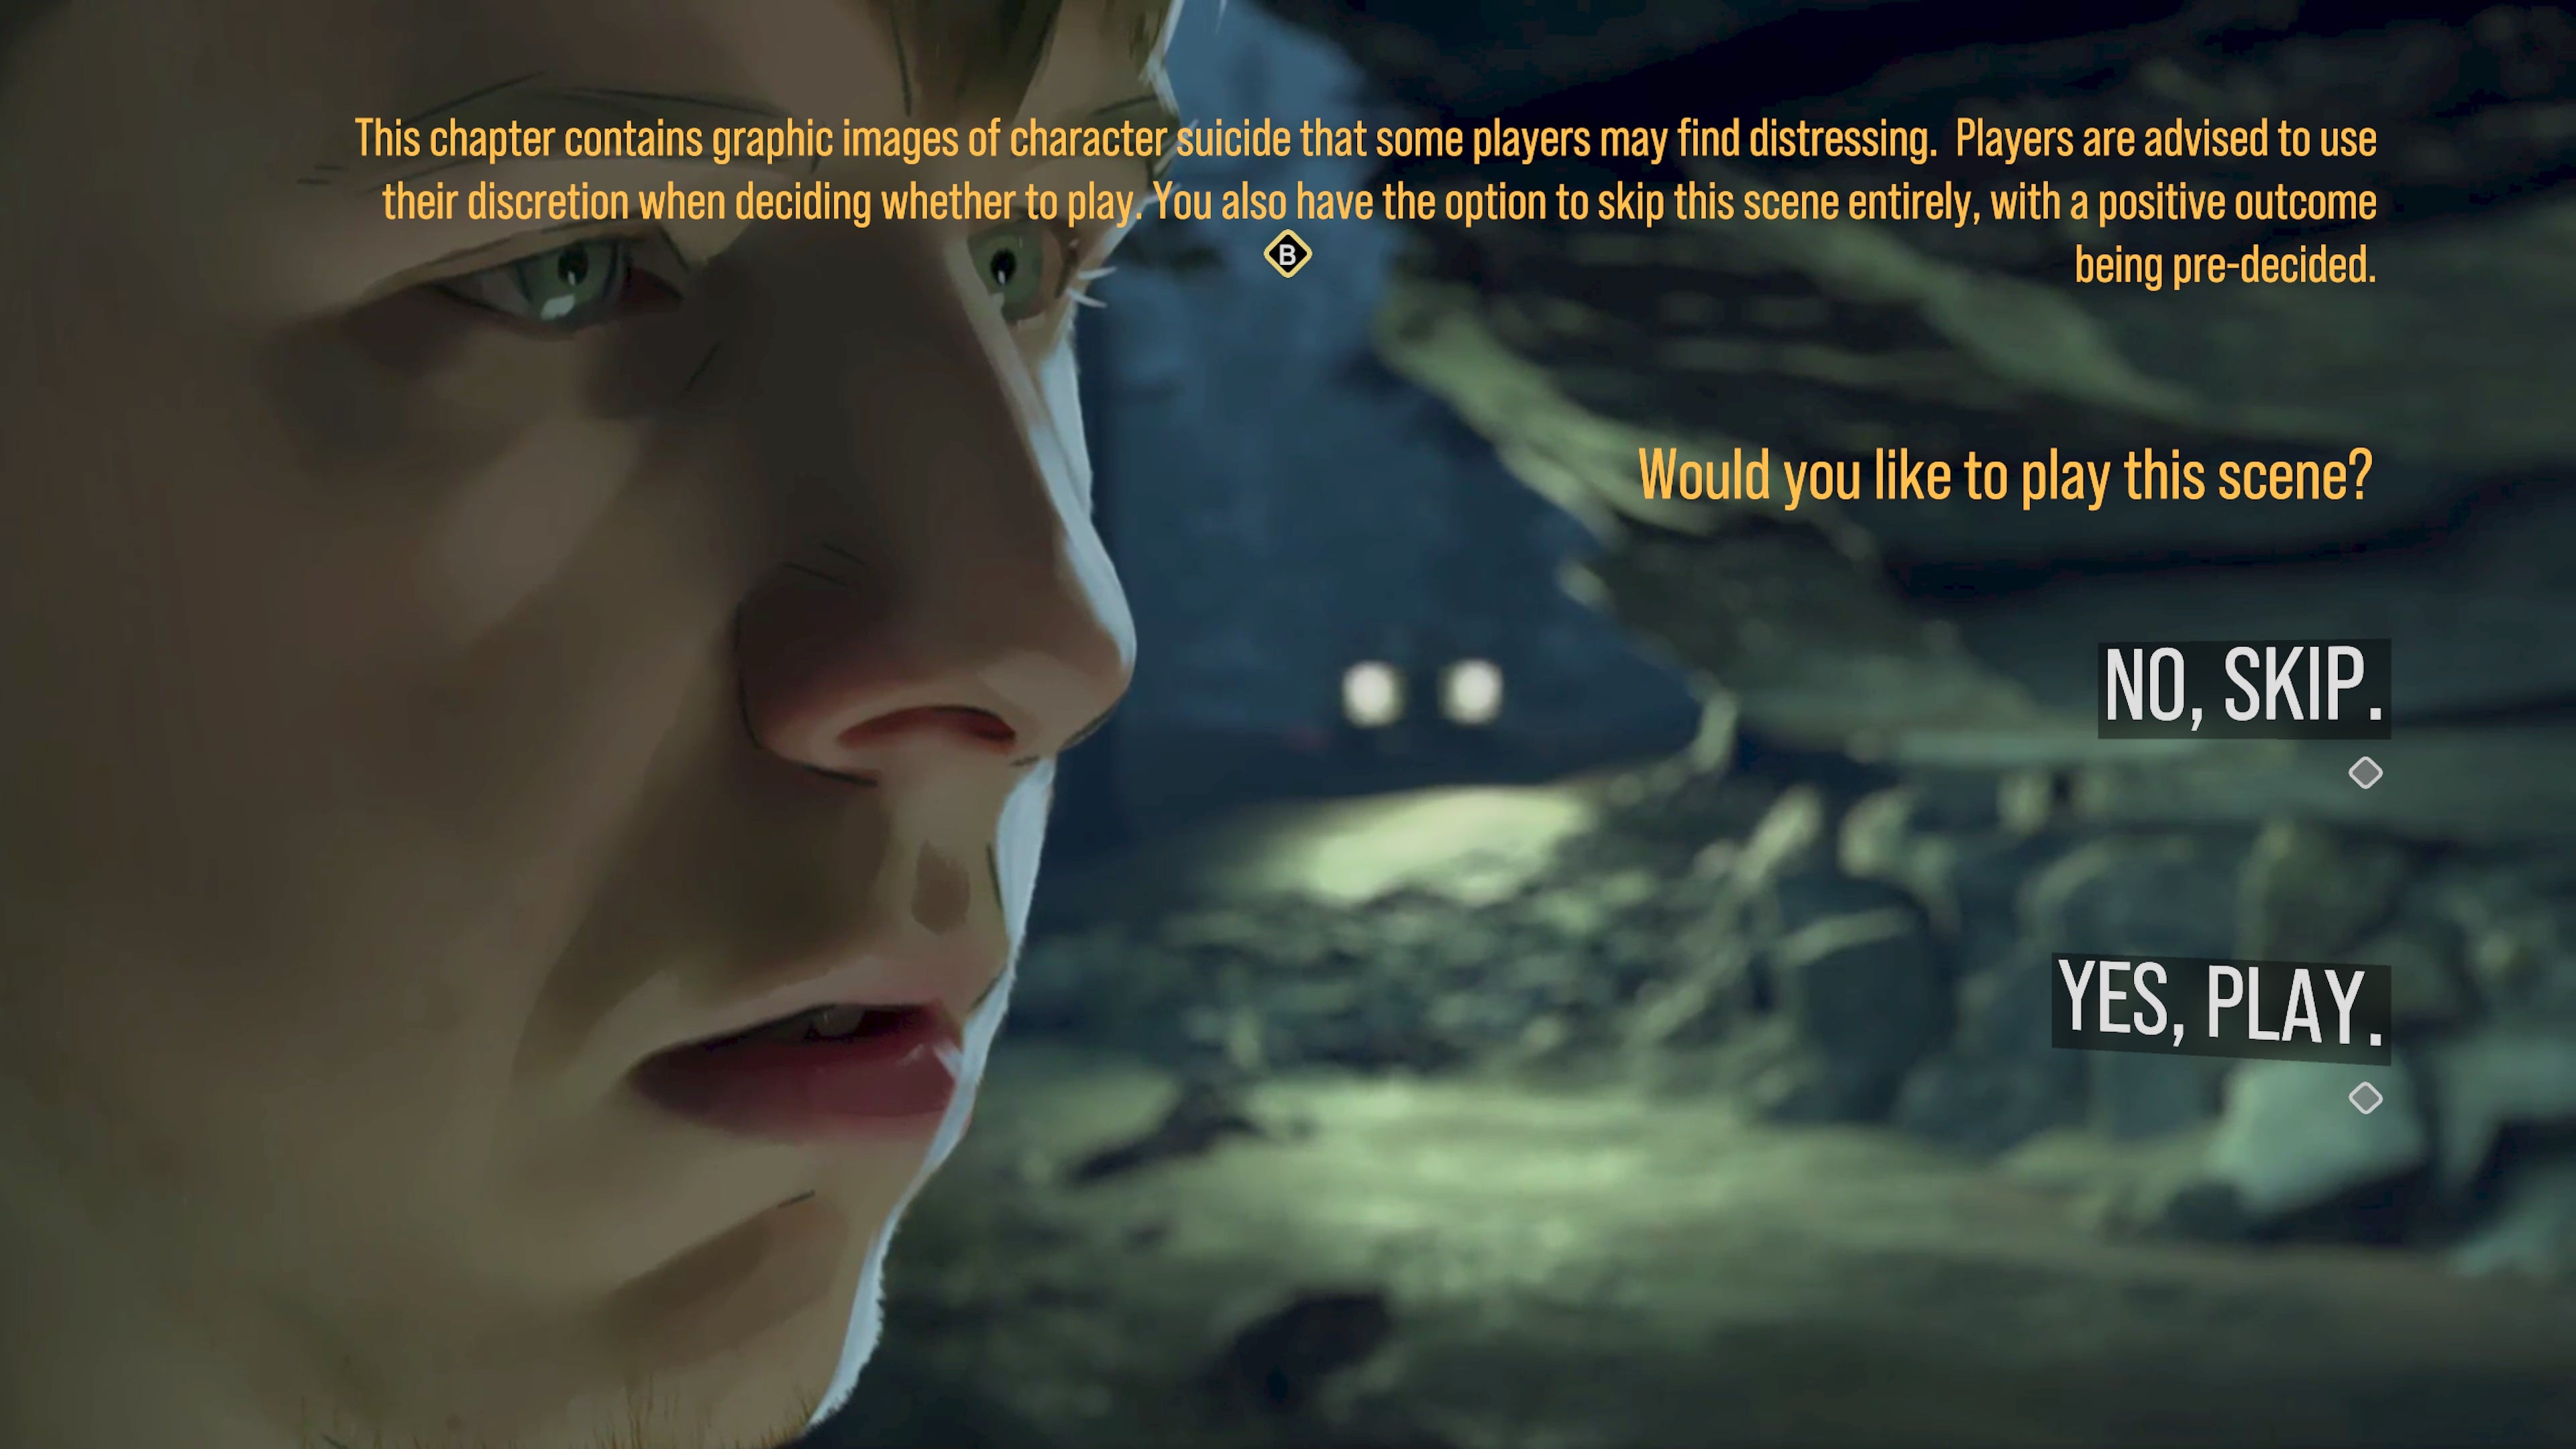 Pre-chapter warning screen about suicide-related skippable content in As Dusk Falls.